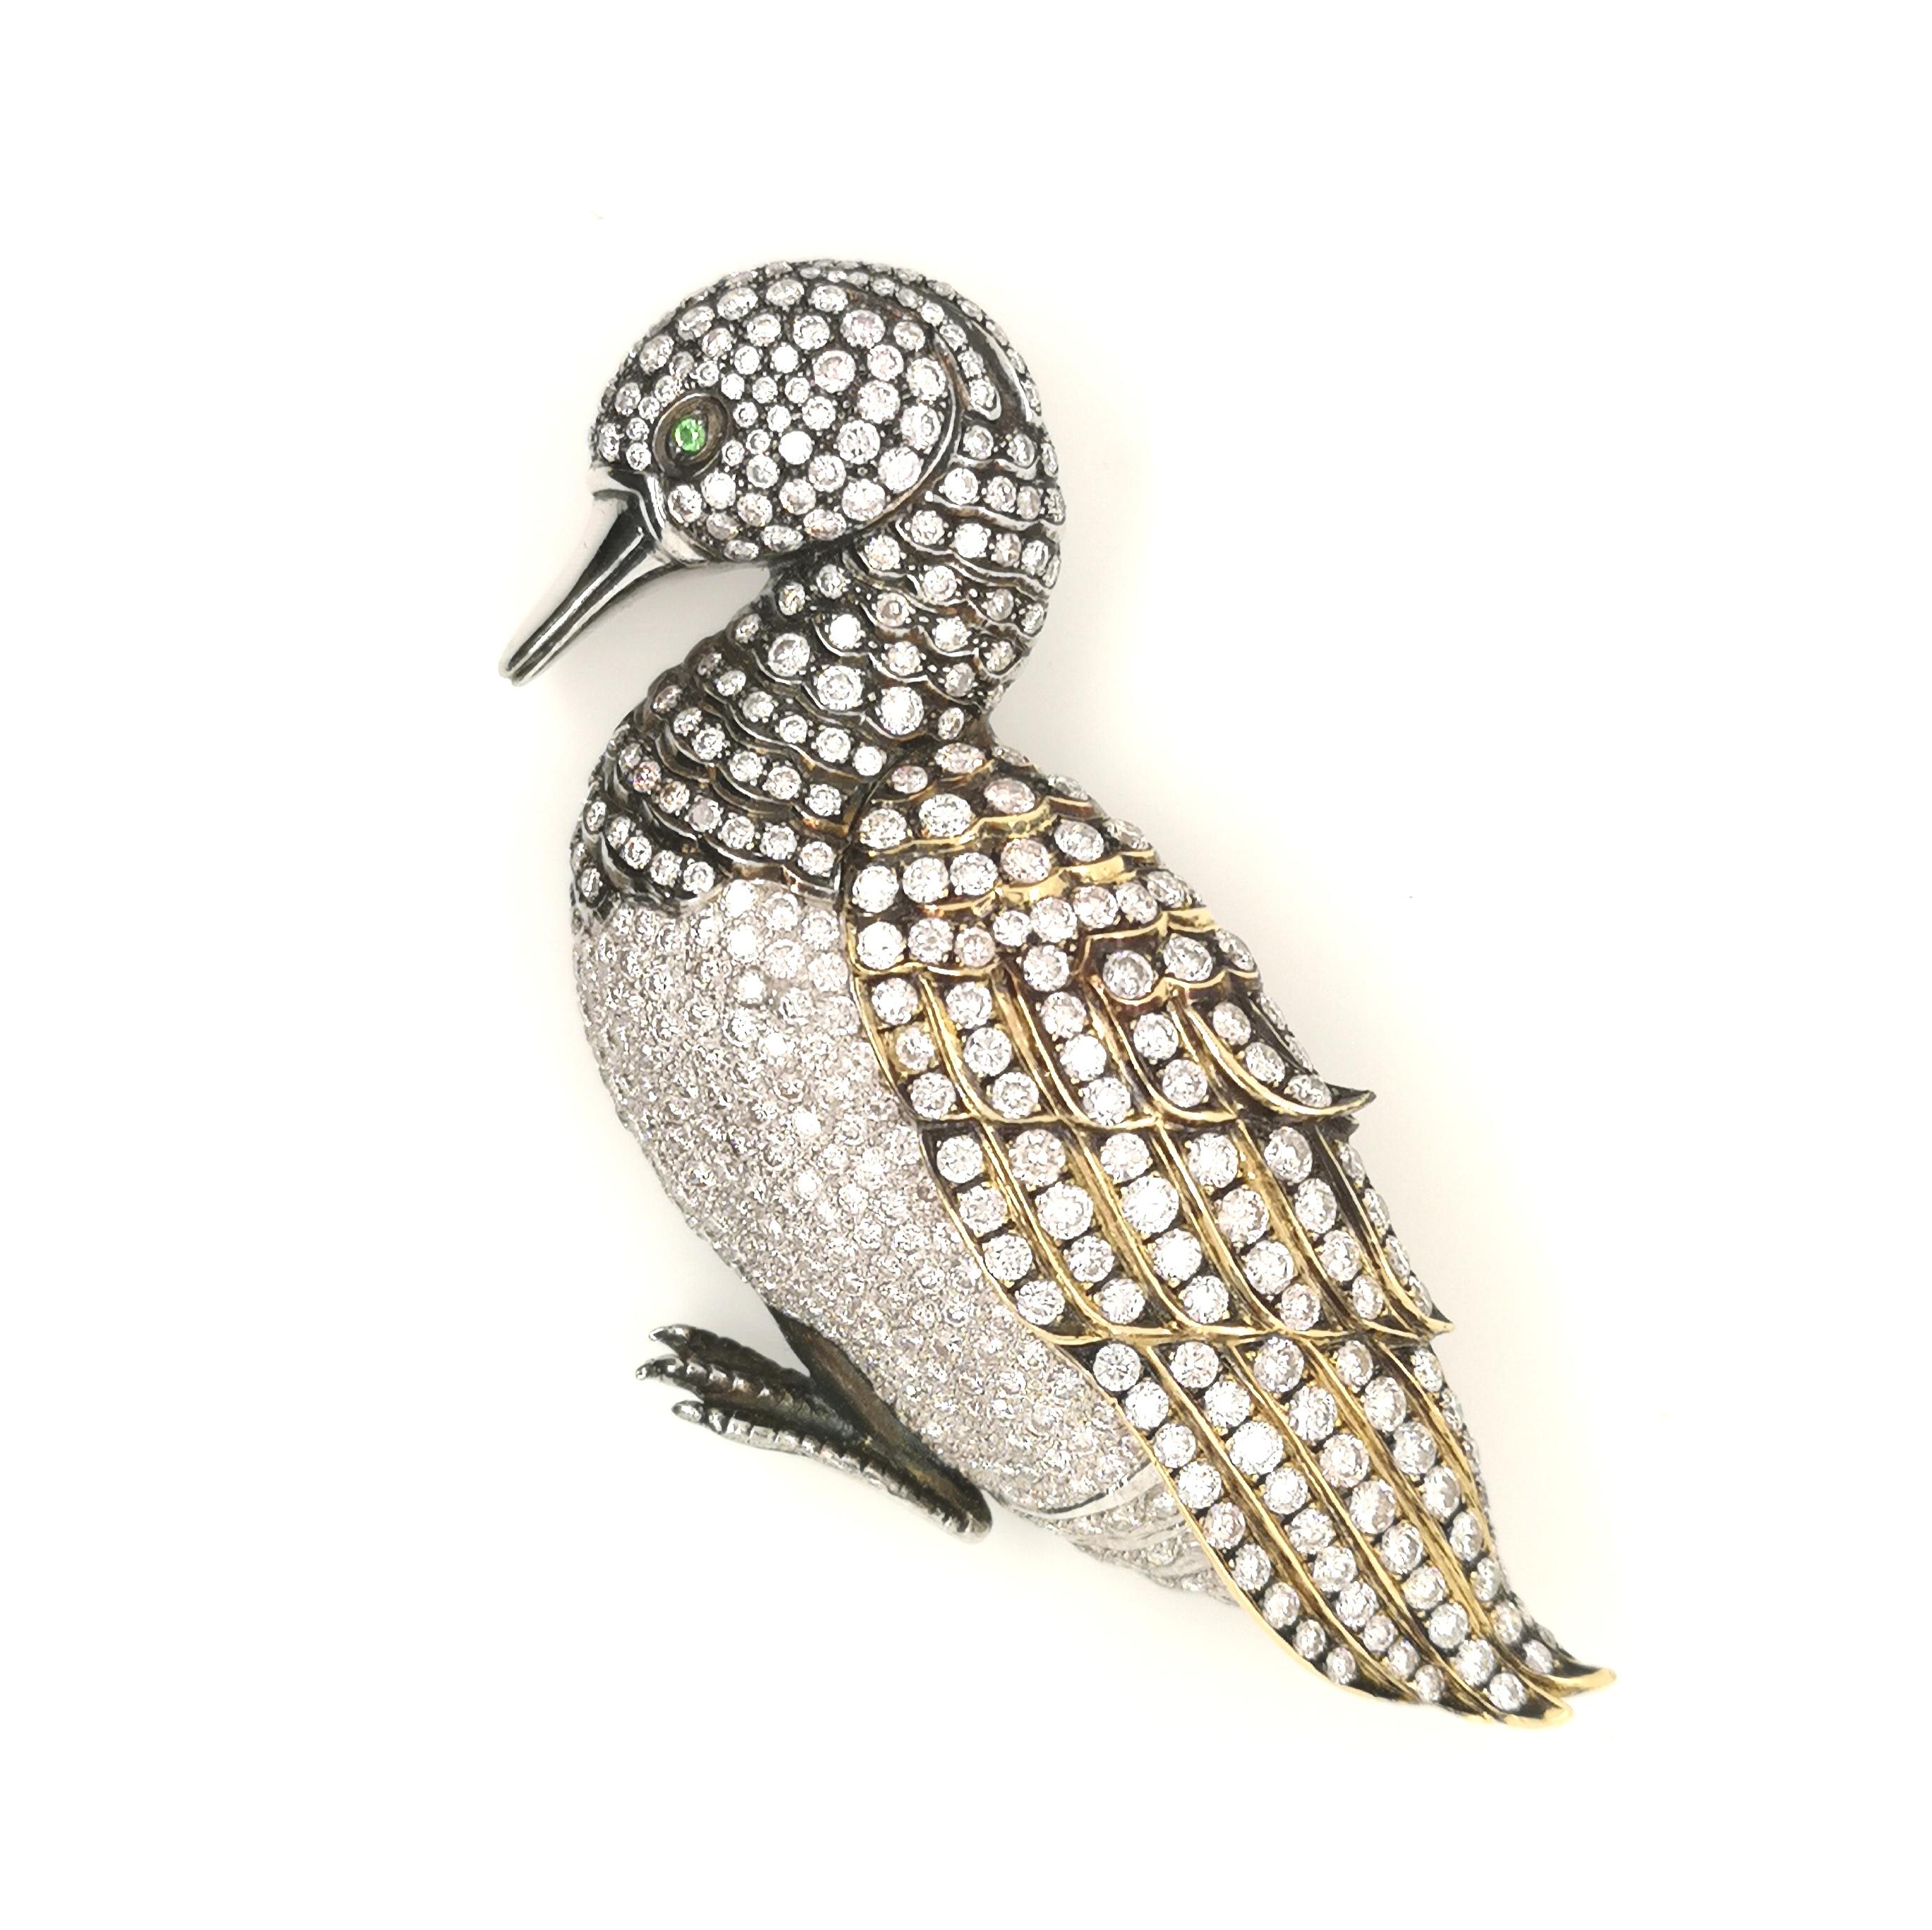 A diamond set duck brooch, round brilliant-cut diamonds set in platinum, with a yellow gold wing and oxidised metal detail to the head, neck and wing, and green garnet eye. Estimated total diamond weight 6.50ct.
Measures approximately 75mm from head